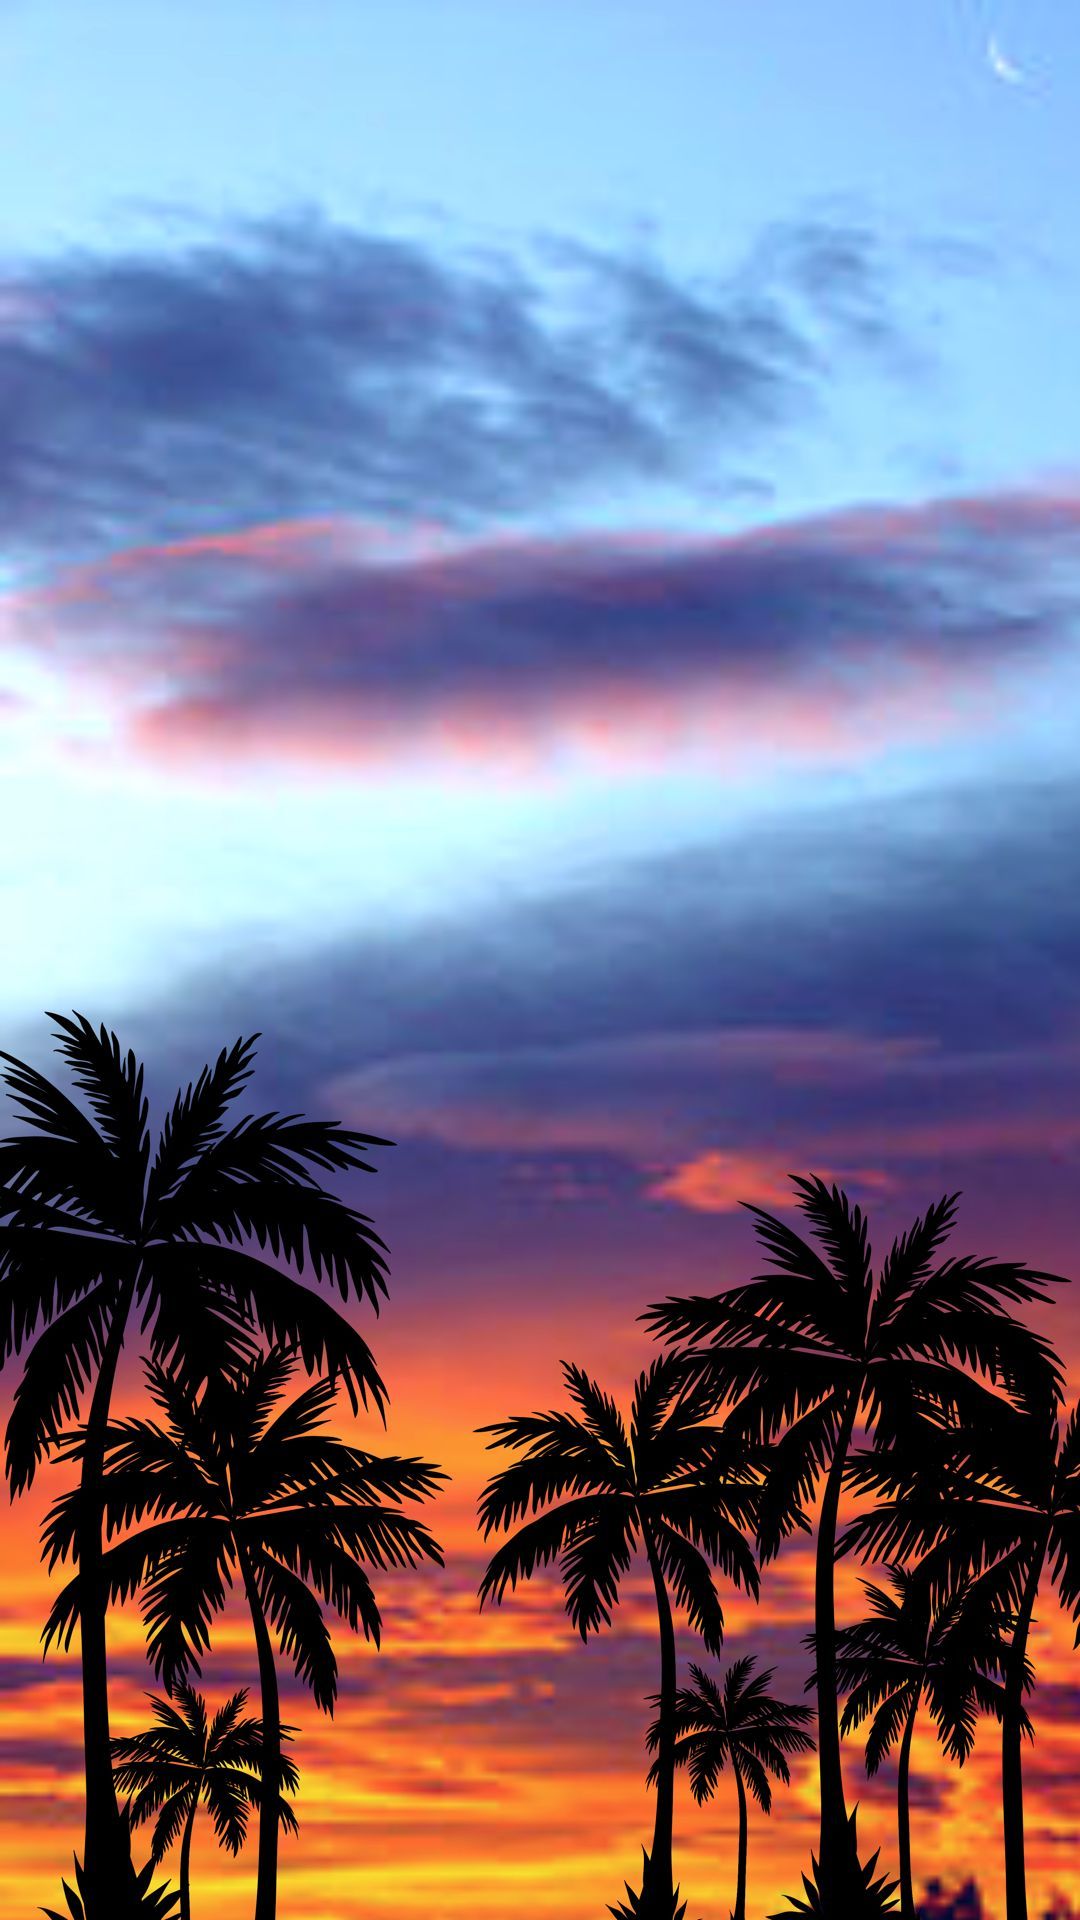 A sunset with palm trees and clouds - Sunset